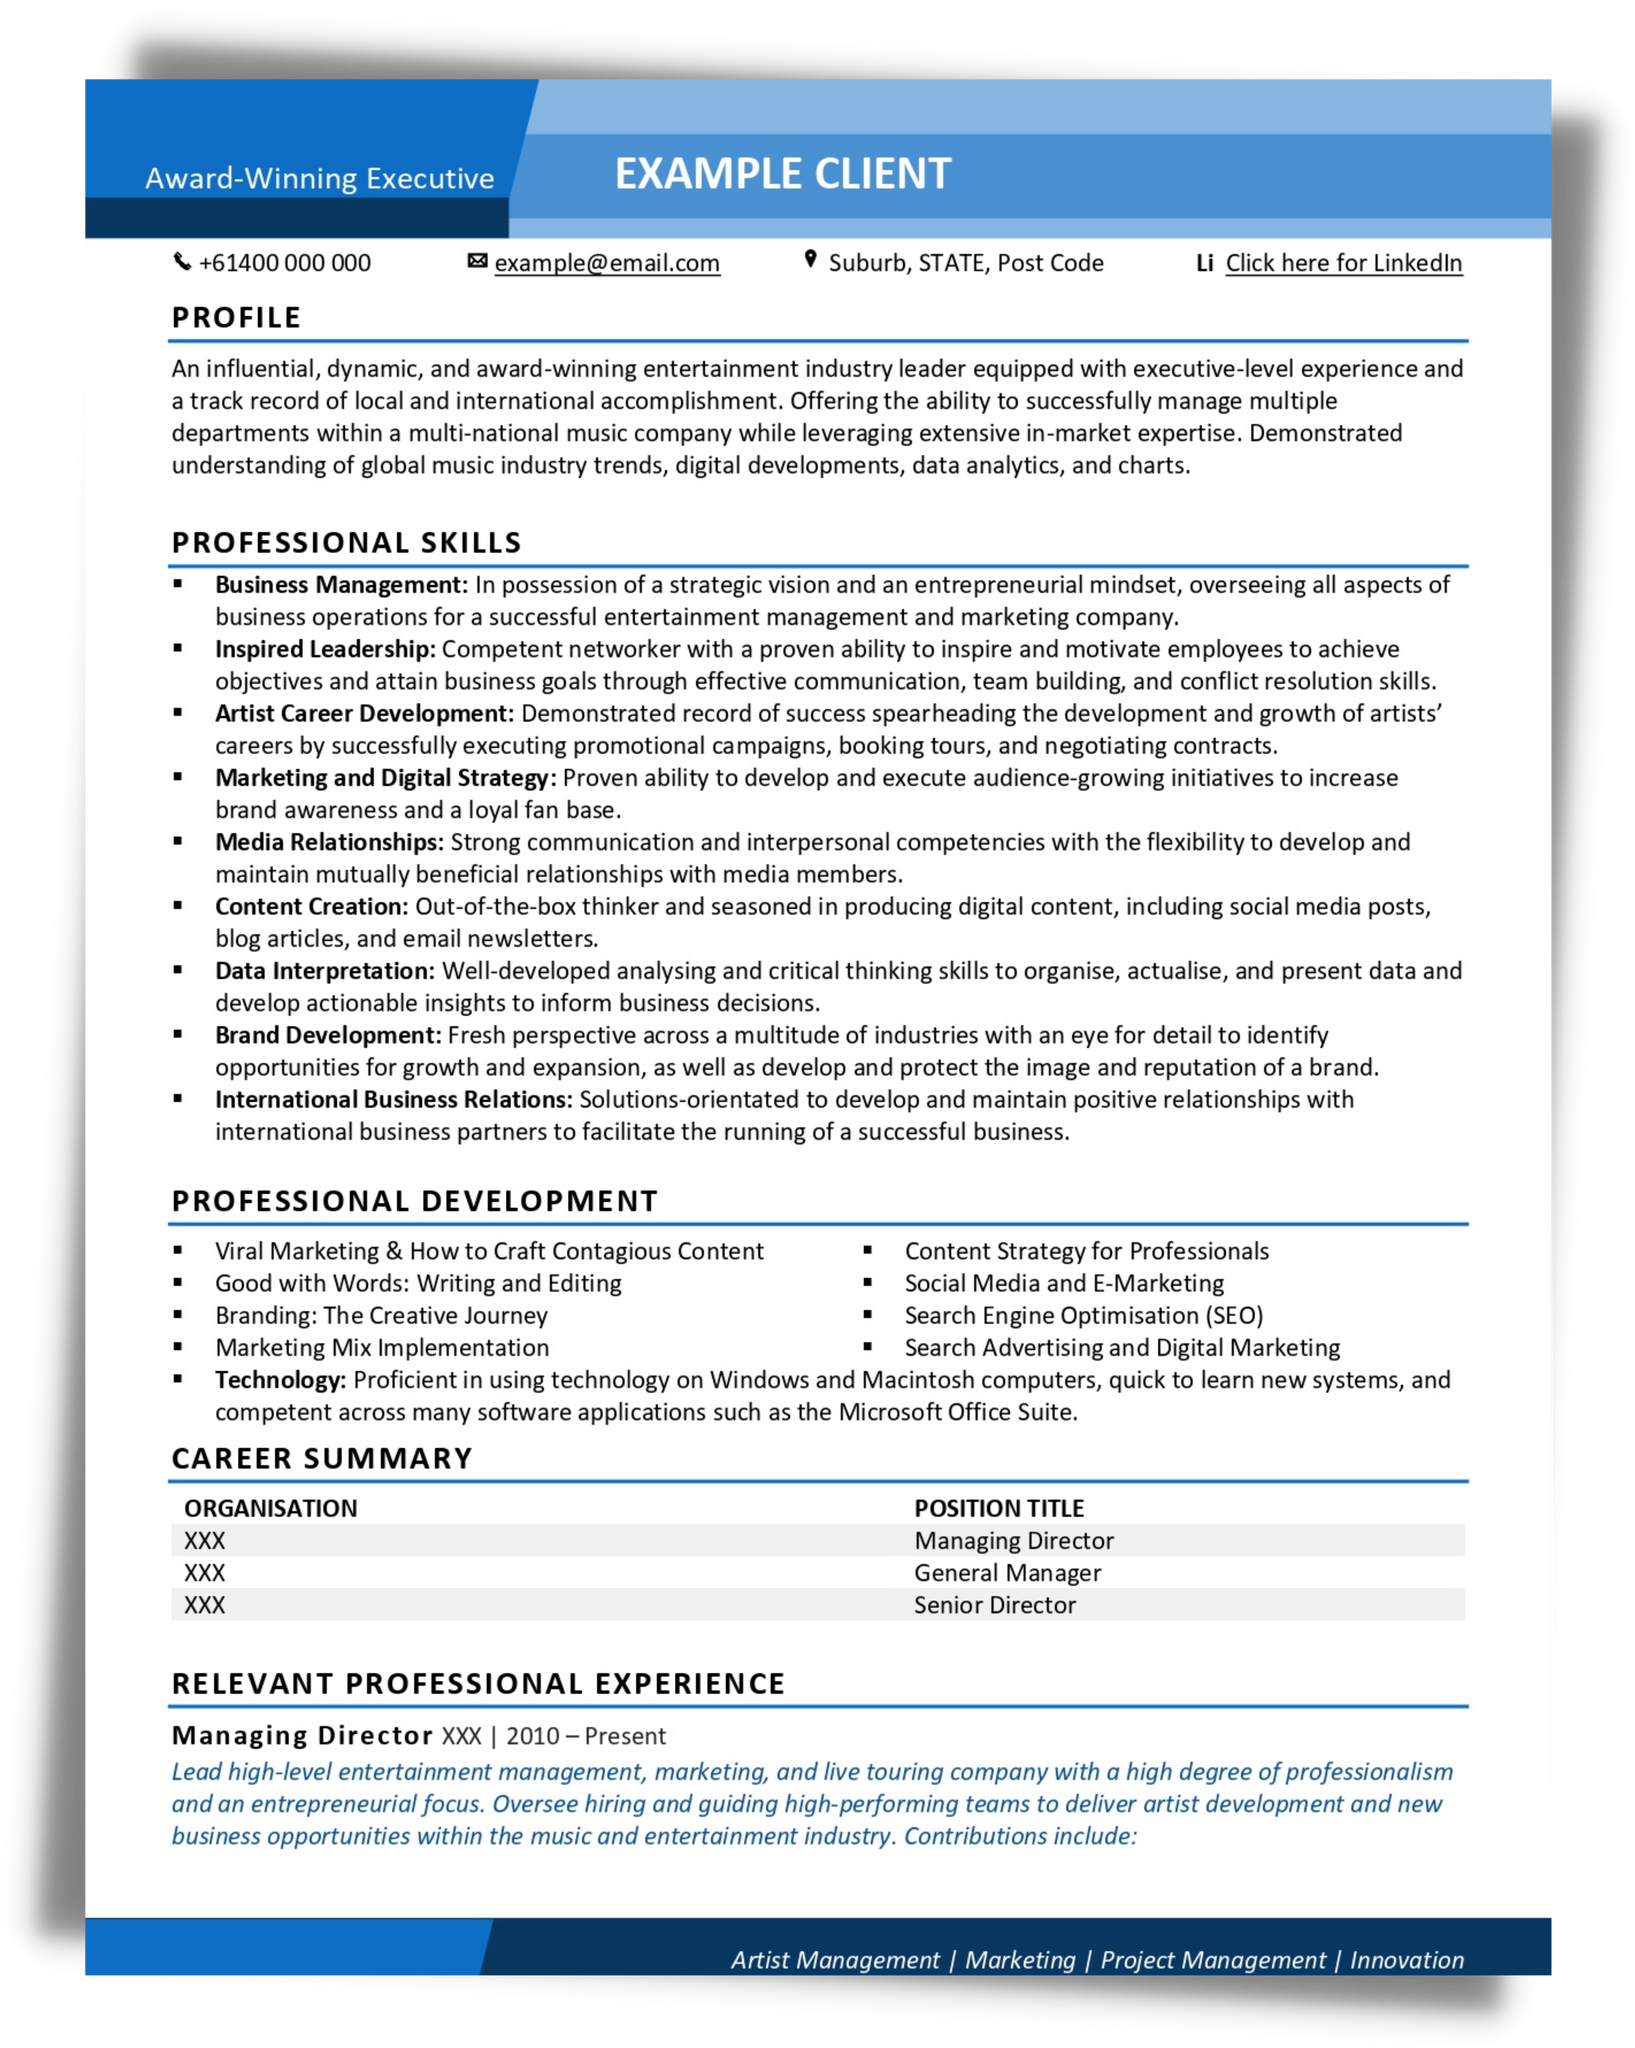 Advertising, Arts, and Media Industry Resume Example (After) 